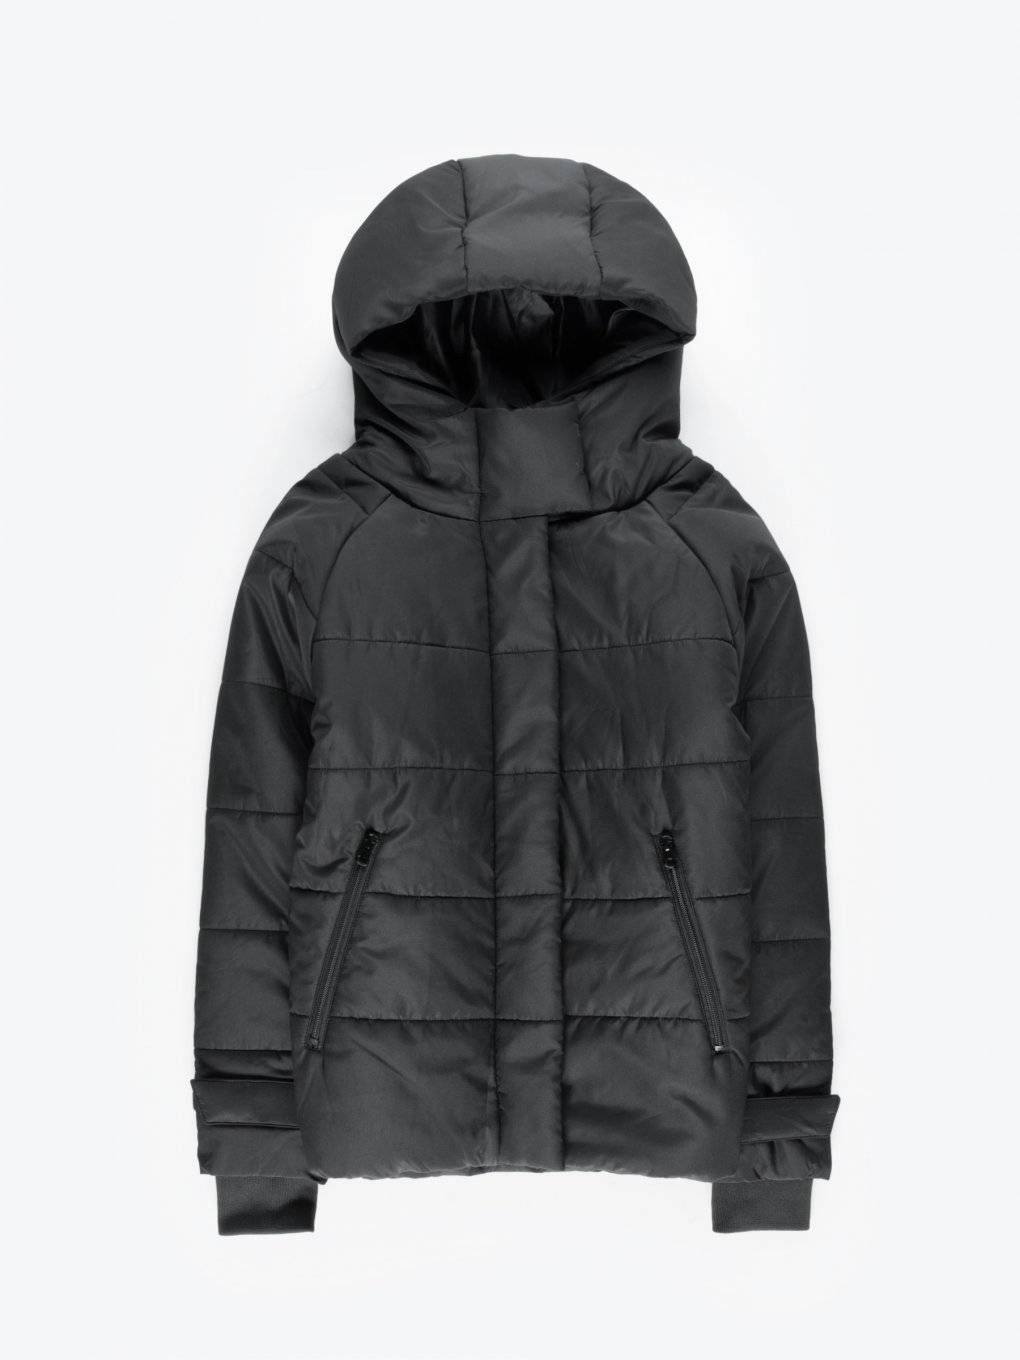 Quilted padded jacket with hood and inner backpack